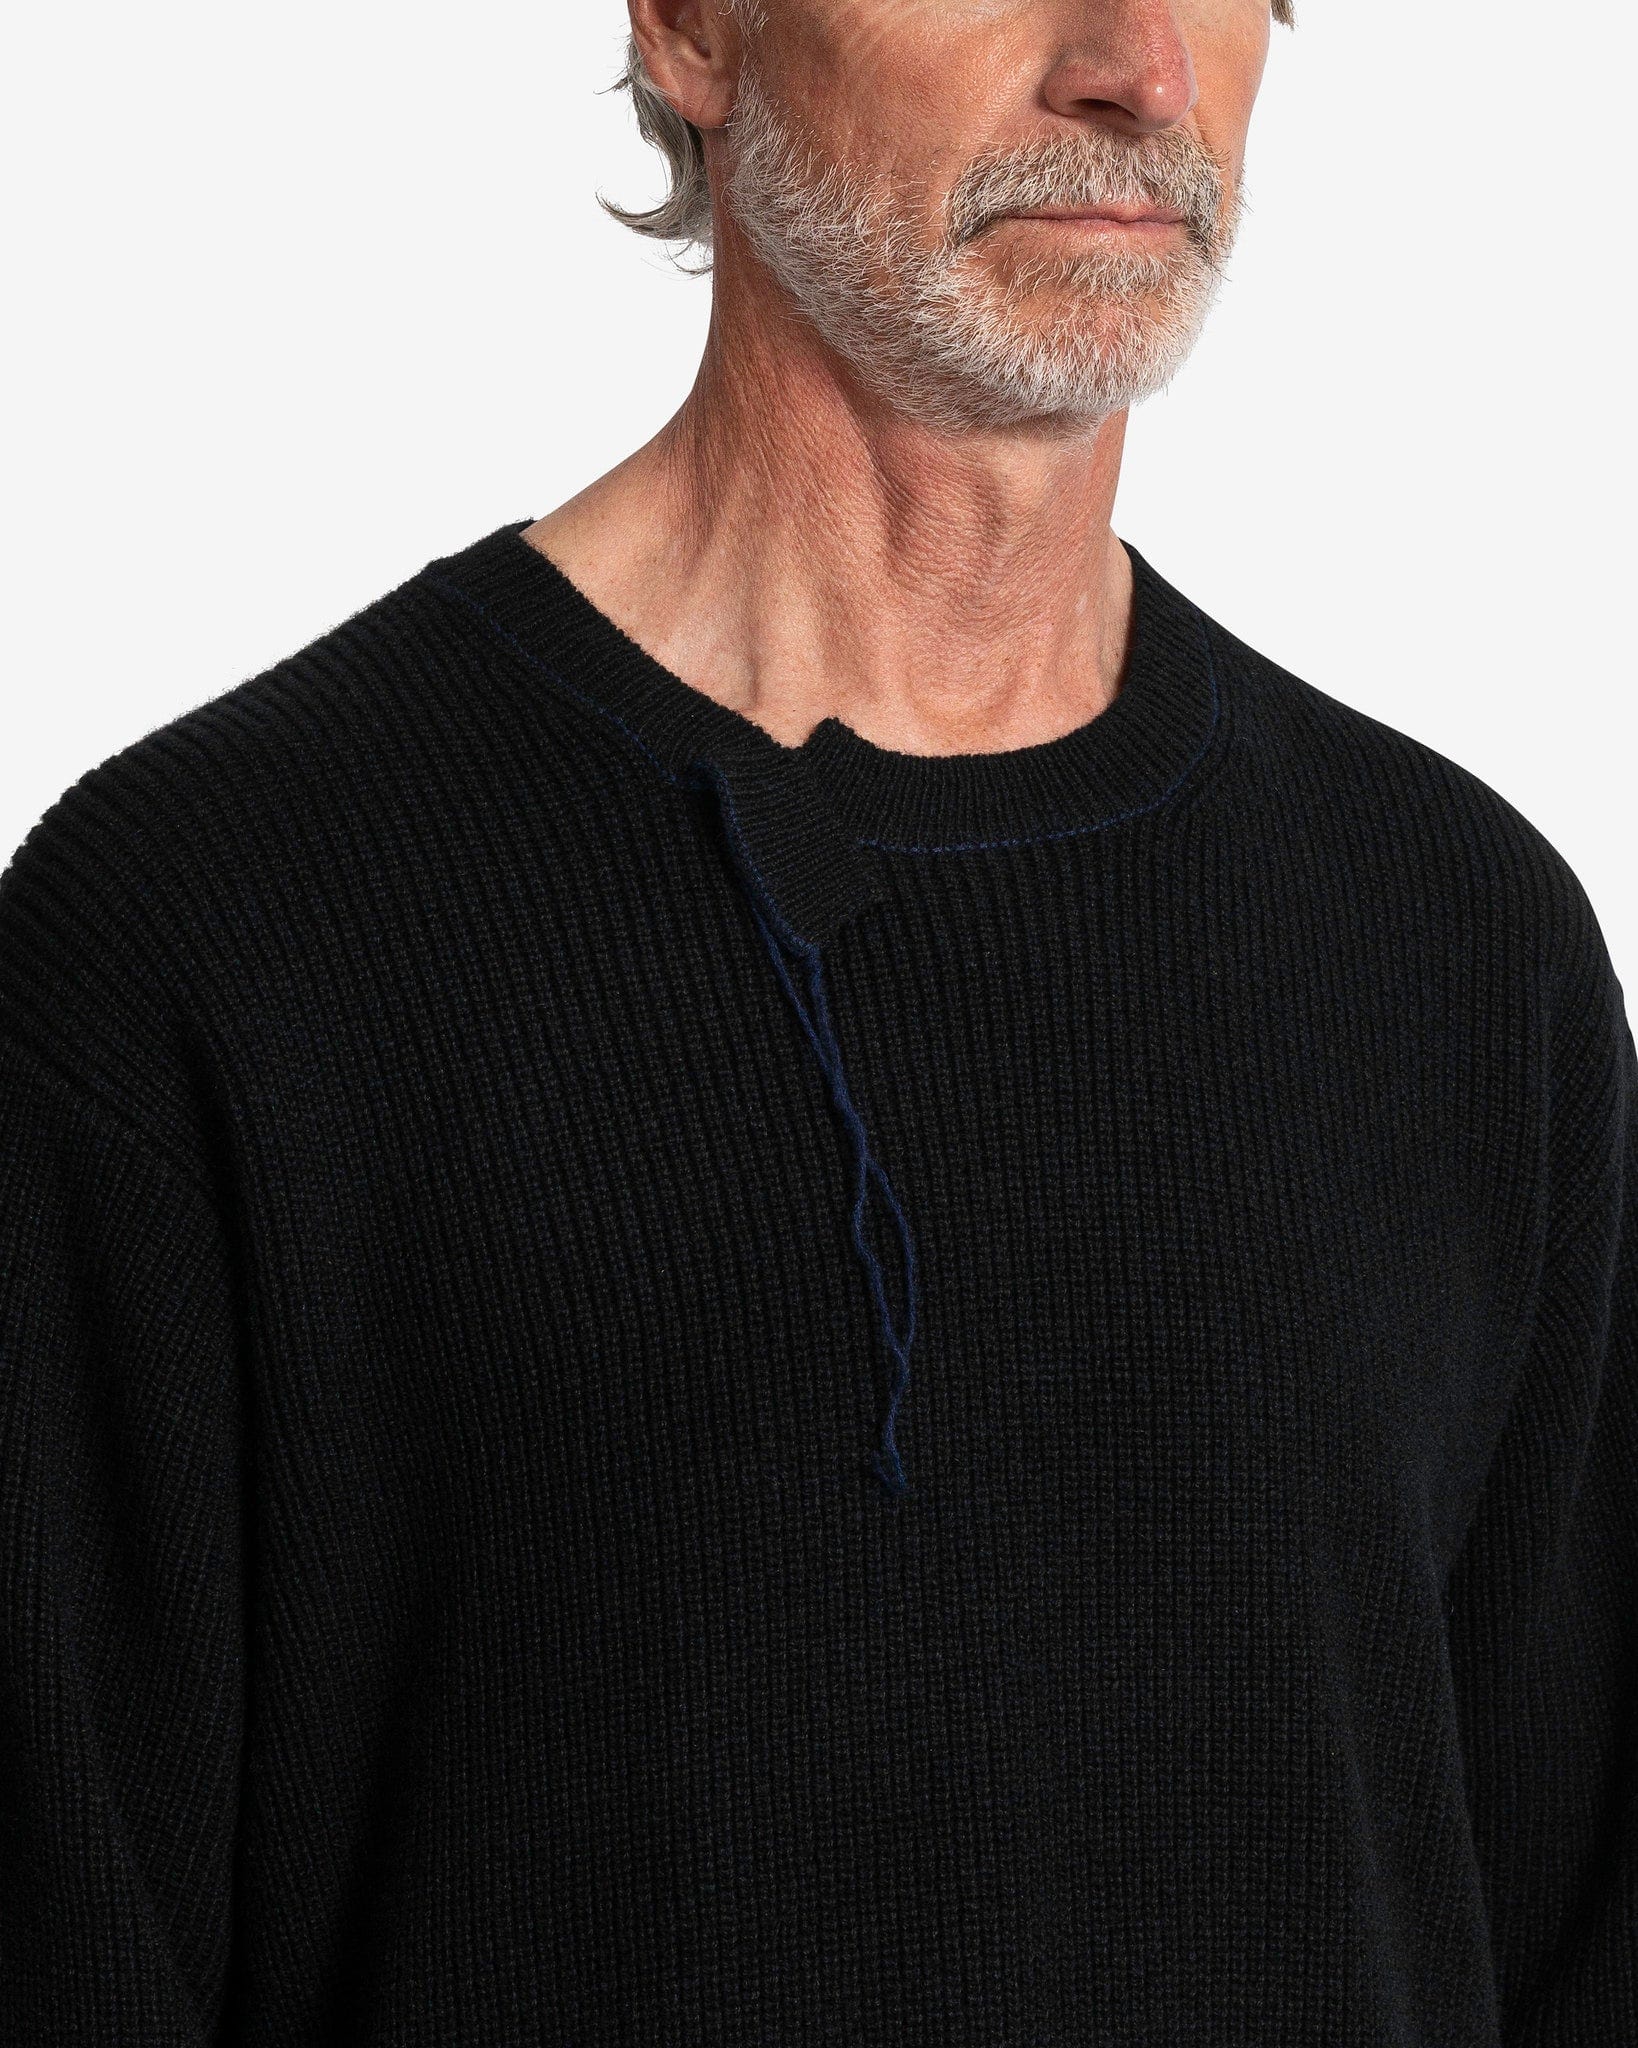 Yohji Yamamoto Pour Homme Men's Sweater Round Neck with Uneven Collar in Black